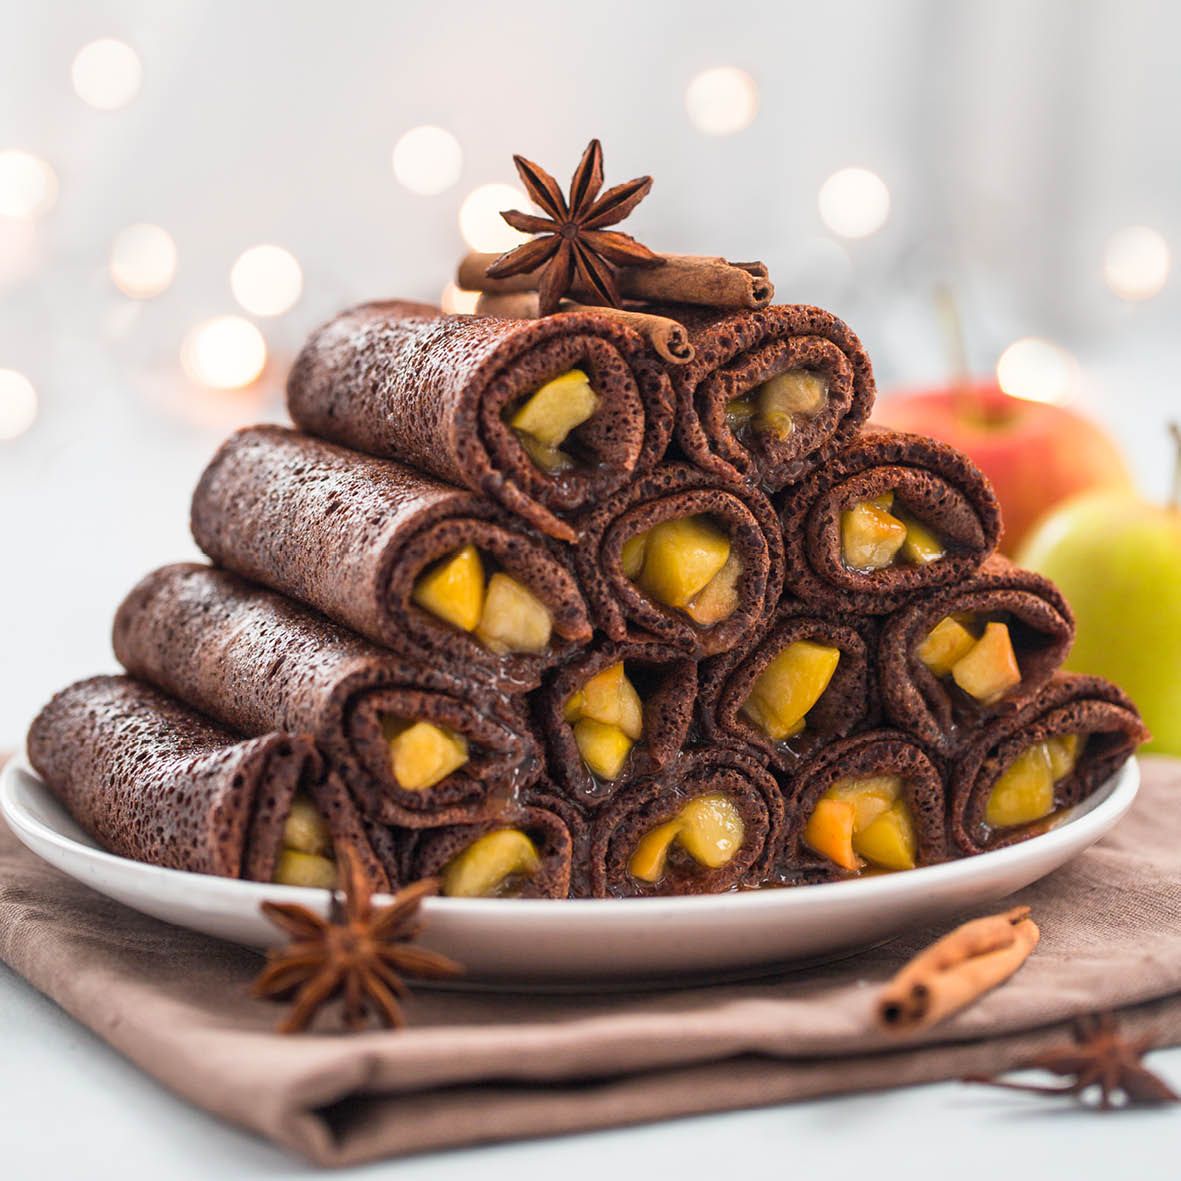 Rolled_Chocolate_Crepes_with_Summer_Stone-fruit.jpg